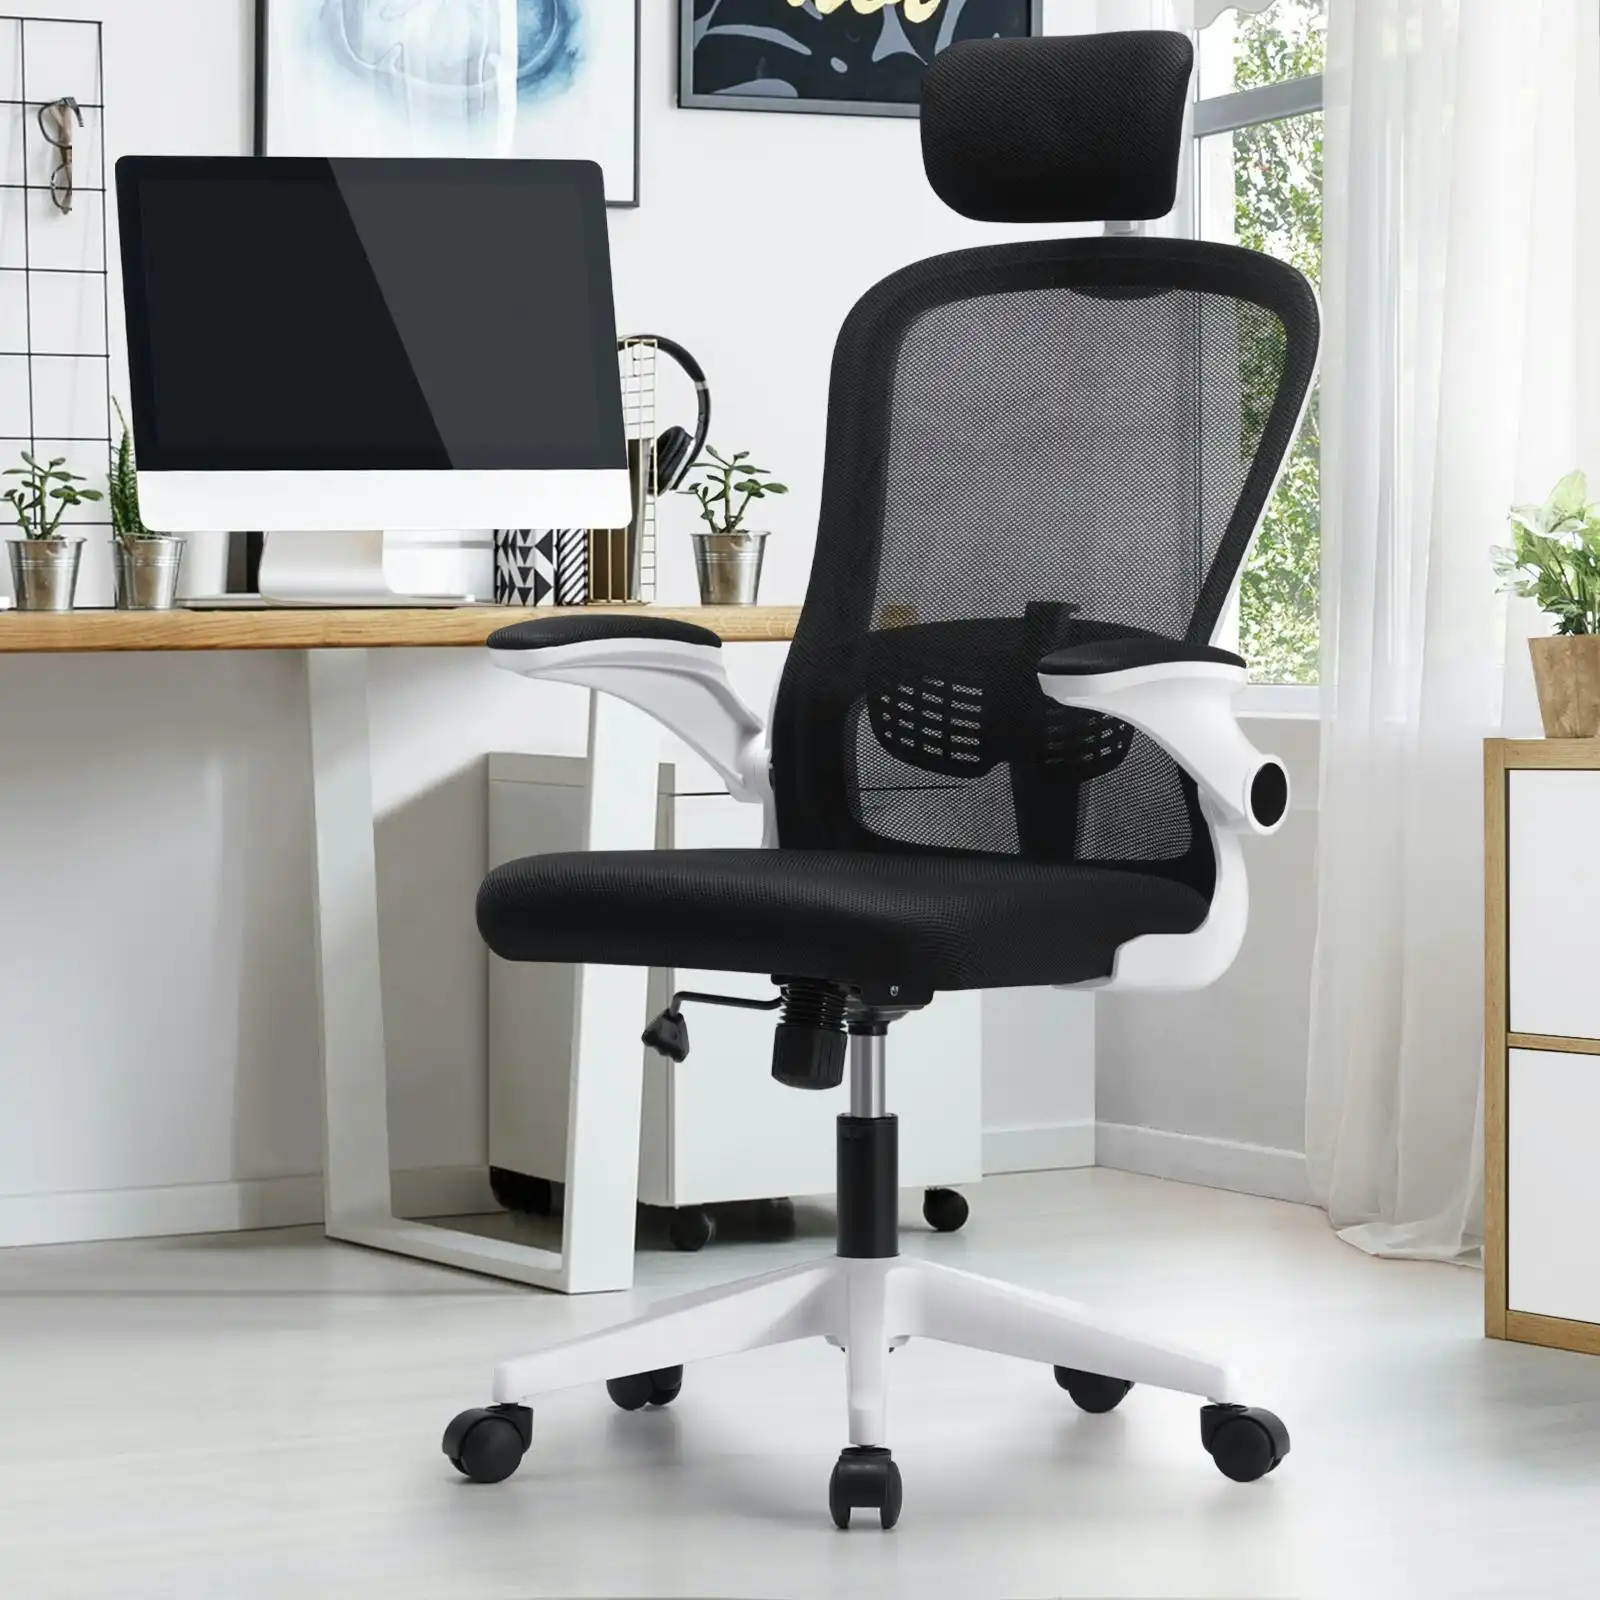 Oikiture Mesh Office Chair Executive Fabric Gaming Seat Racing Tilt Computer Black&White